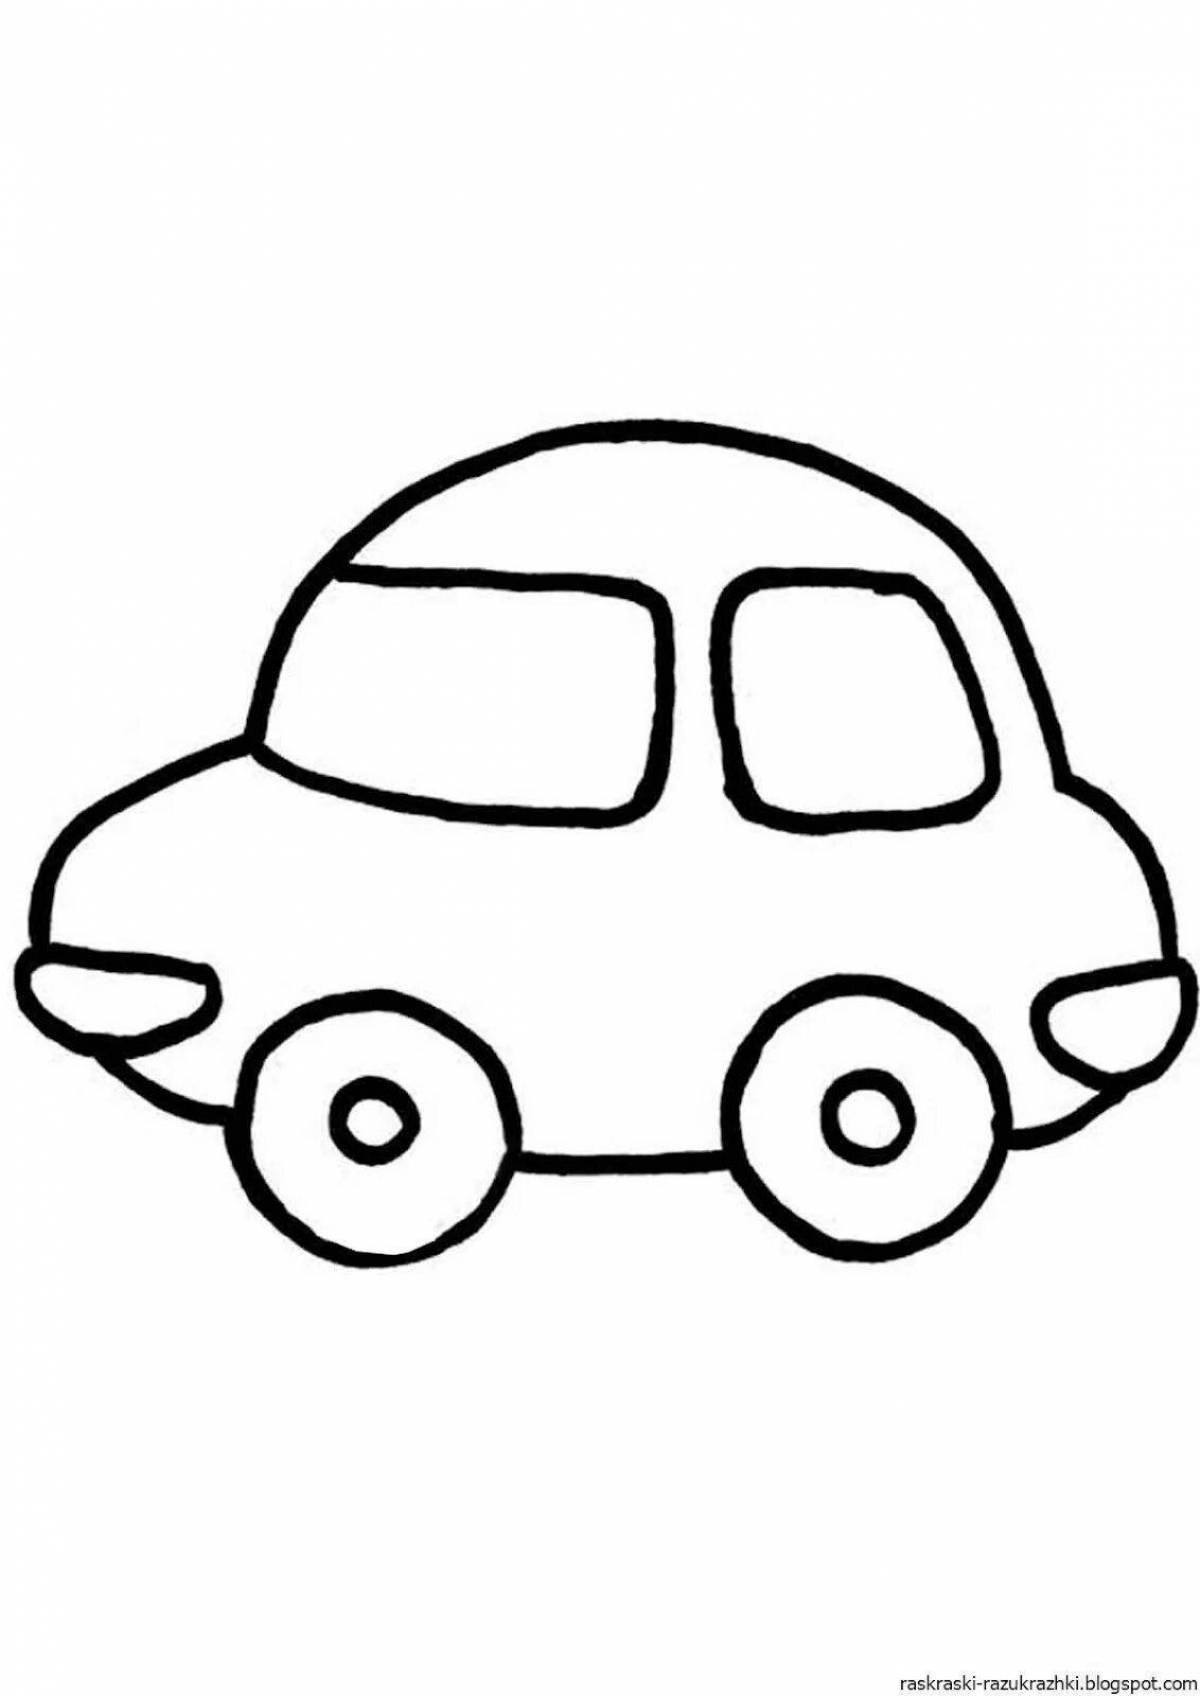 Coloring page adorable cars 2